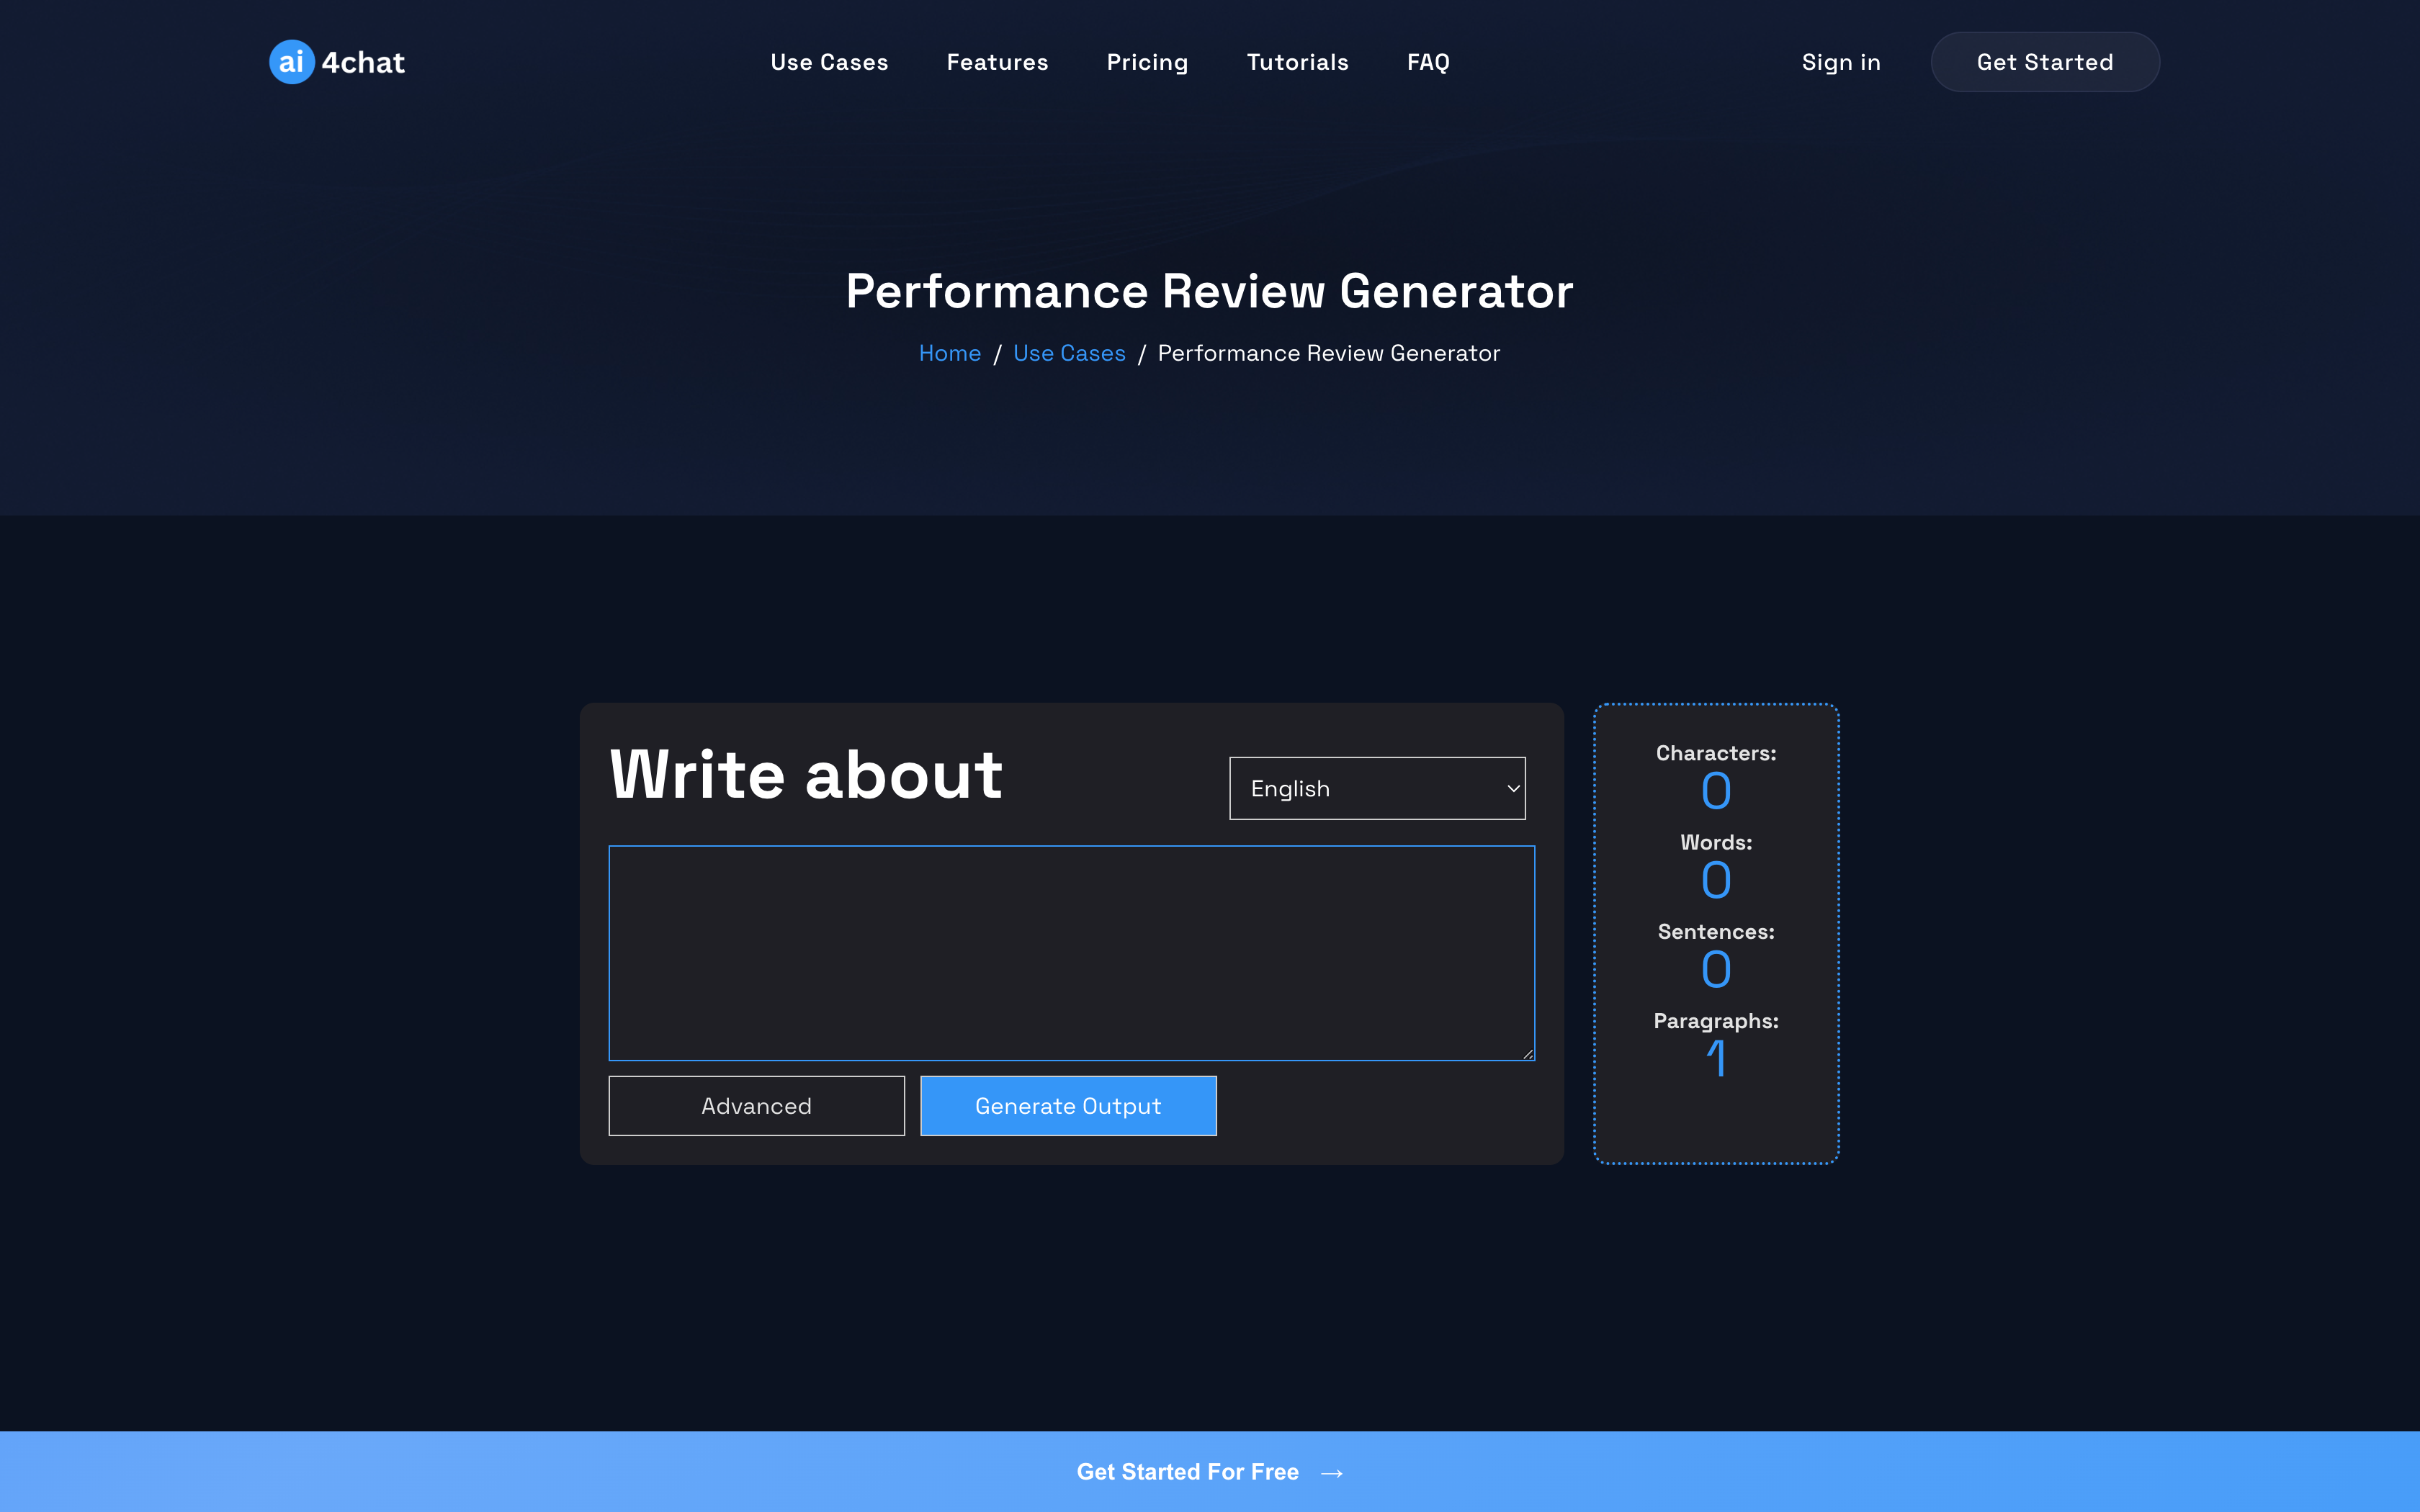 Performance Review Generator by AI4Chat